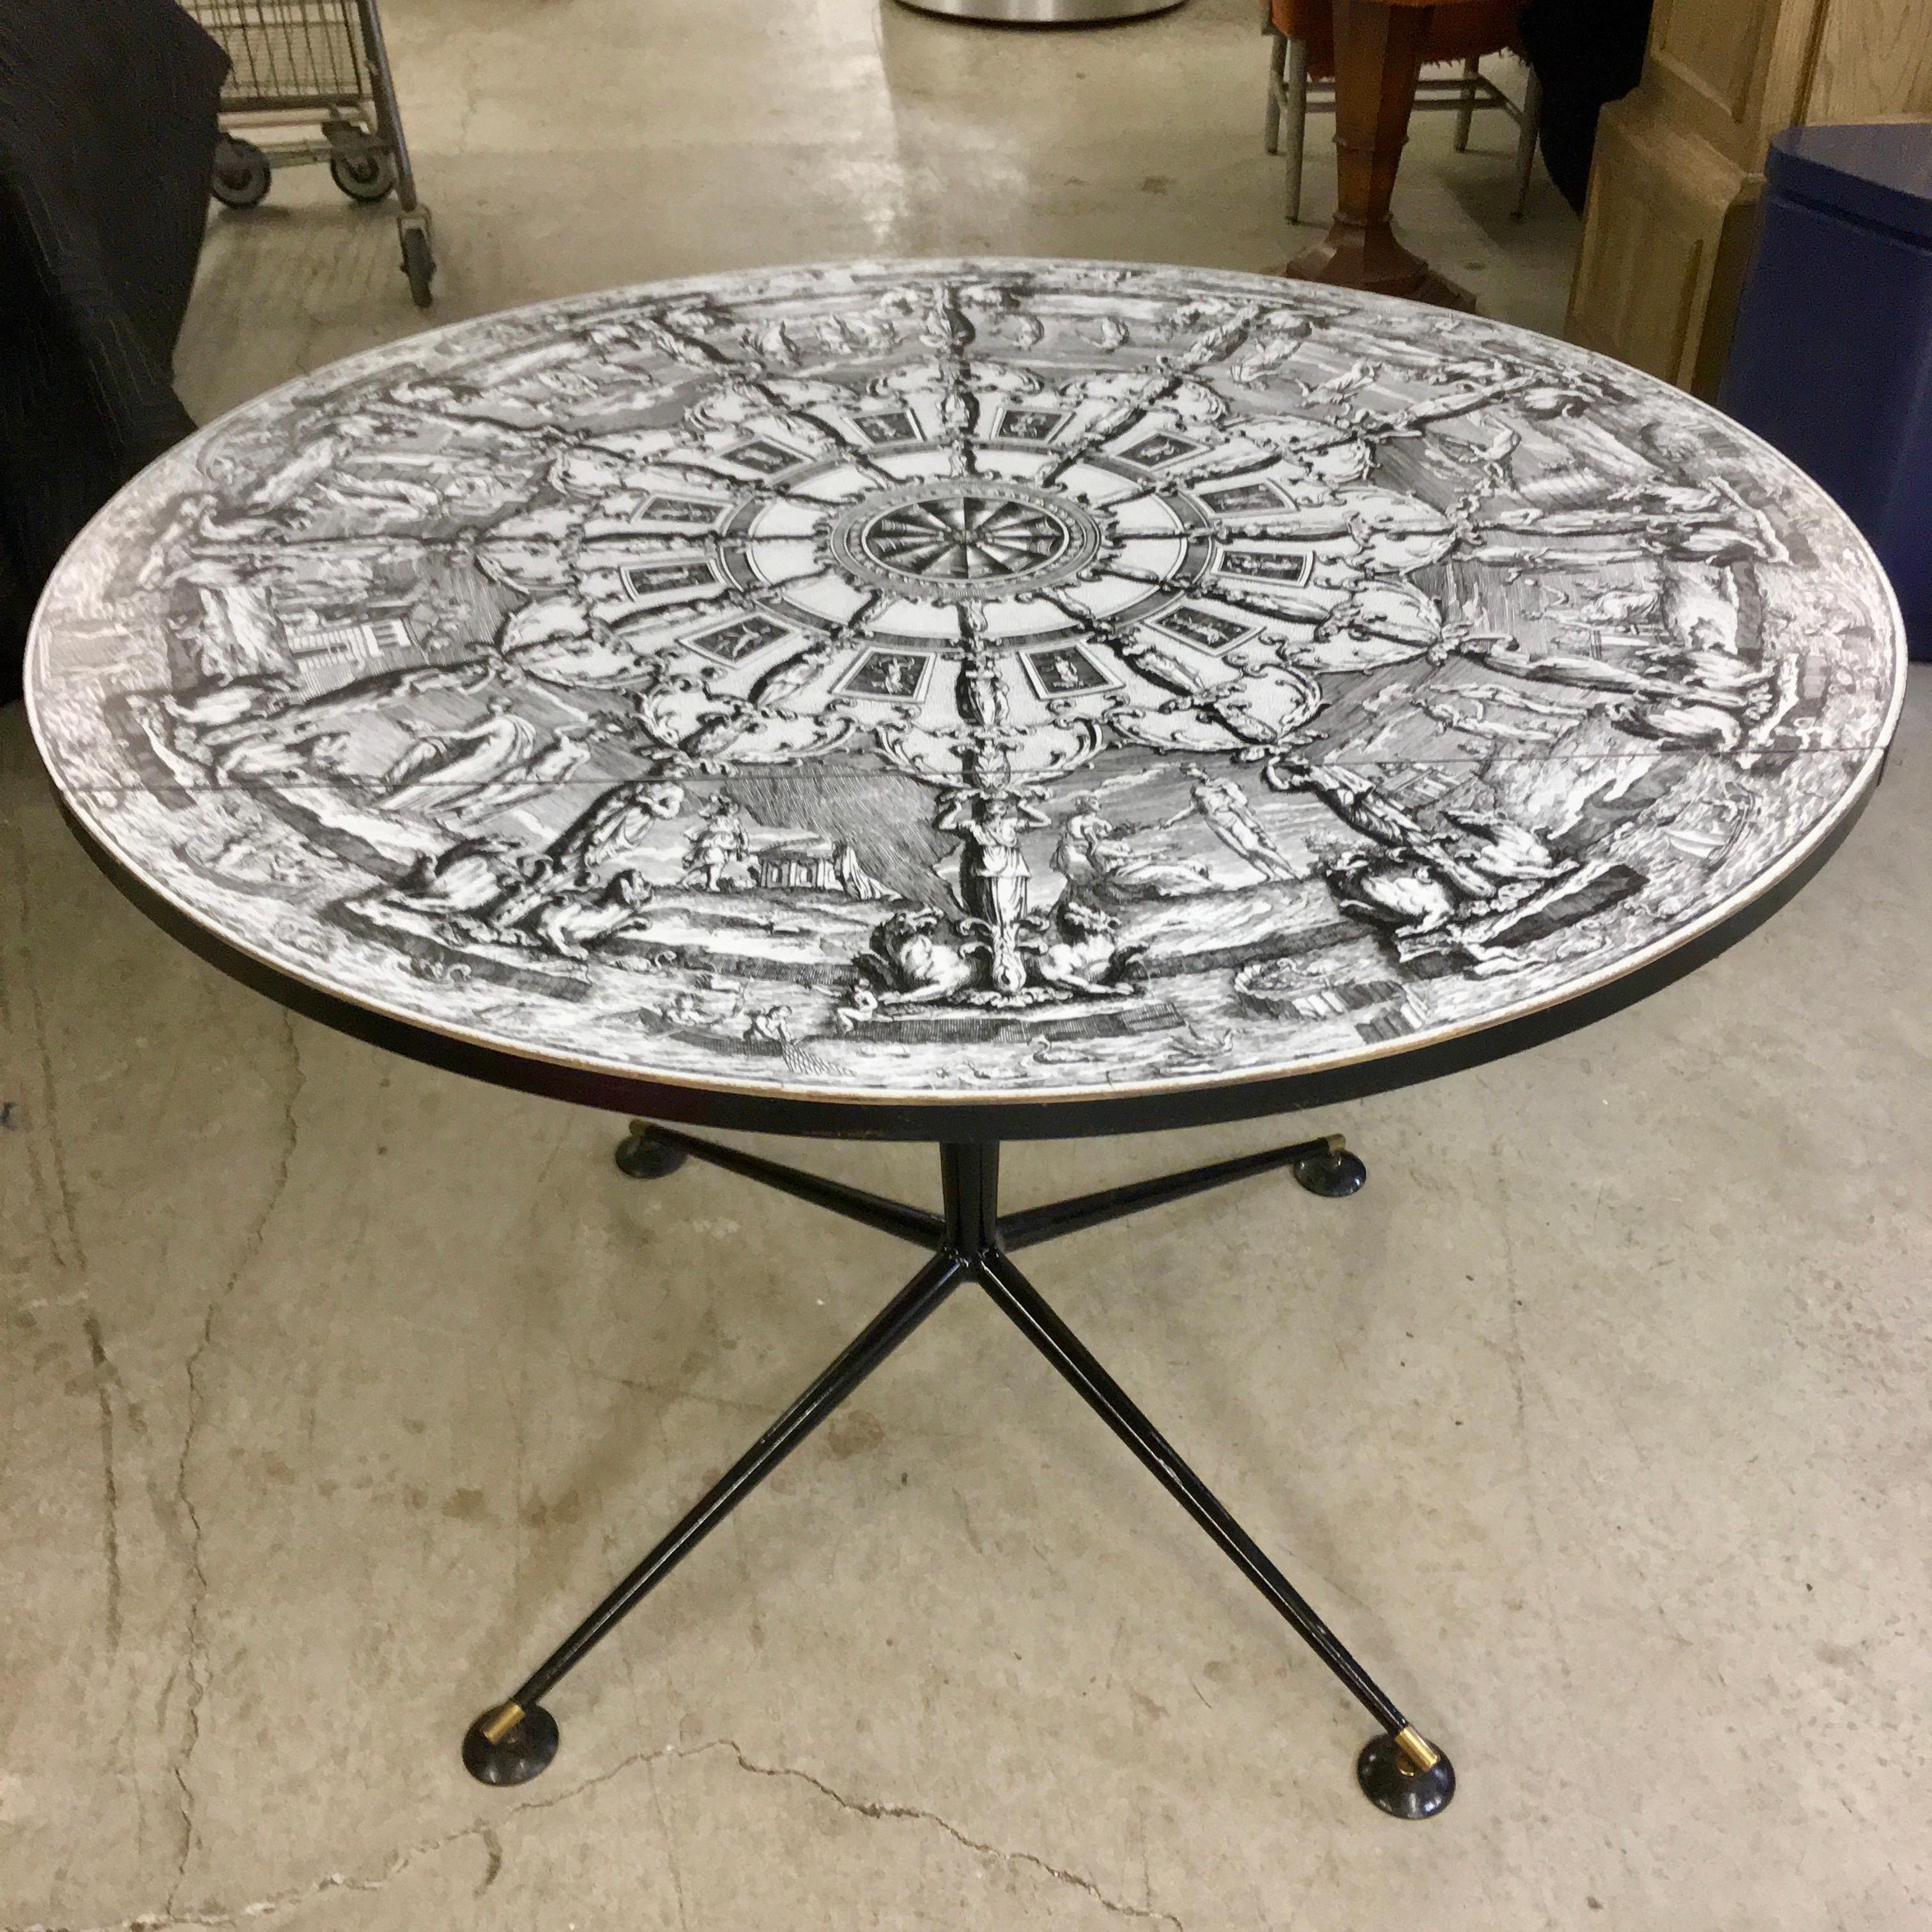 Vintage 1960s round double drop-leaf table top in style of Fornasetti, mounted on single slim tapered black enameled metal pedestal stem on four star splayed base, with brass sabots and round disk 'lunar landing pad' self-leveling feet designed by